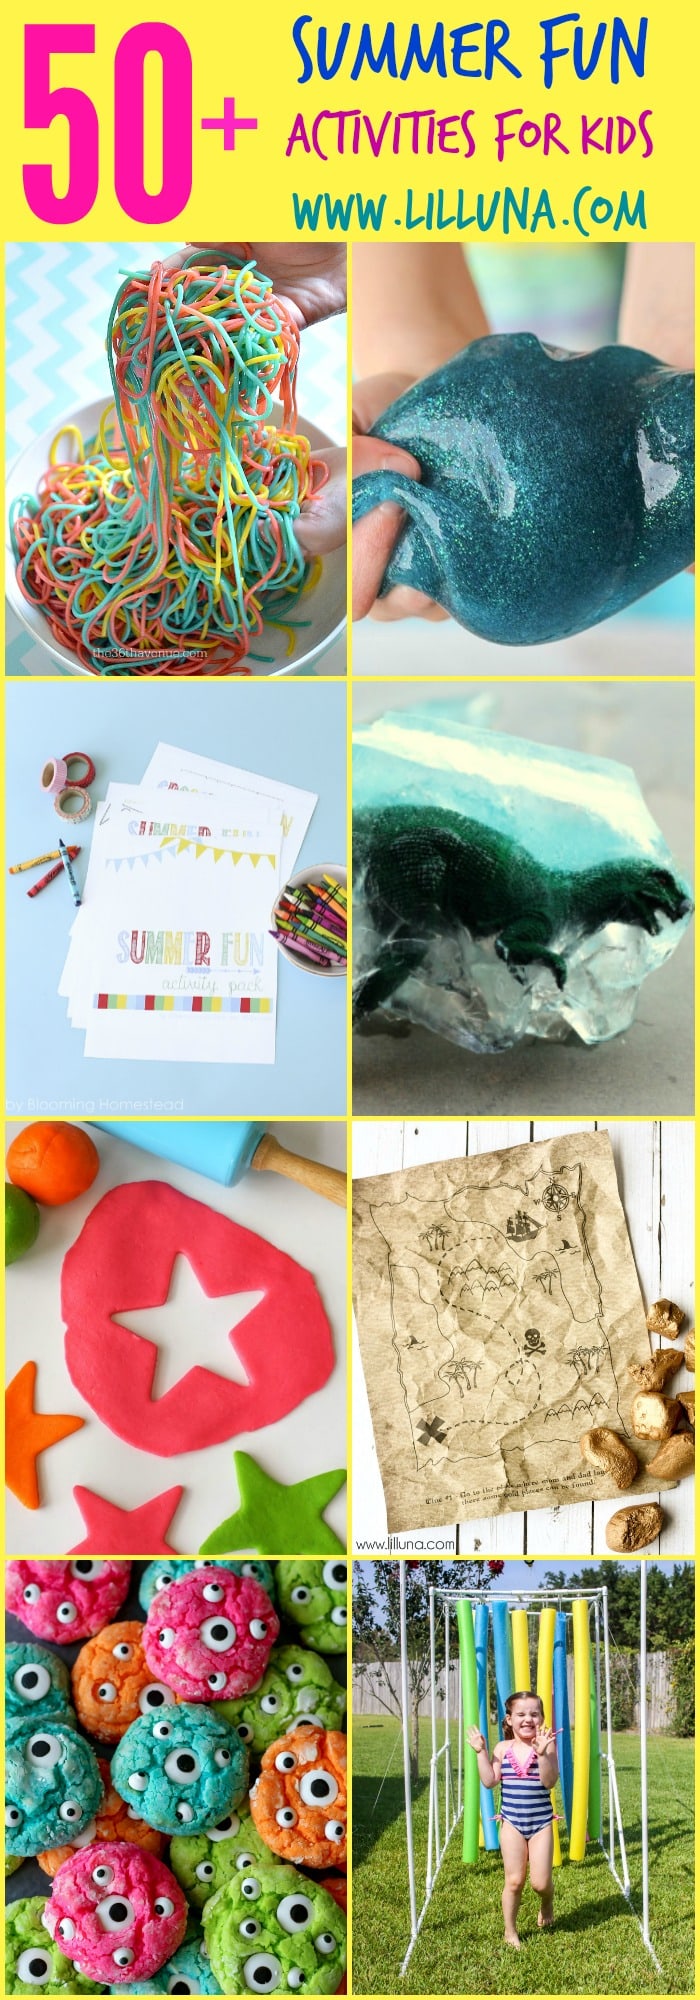 50+ Fun, inexpensive and easy kids activities to do this summer!